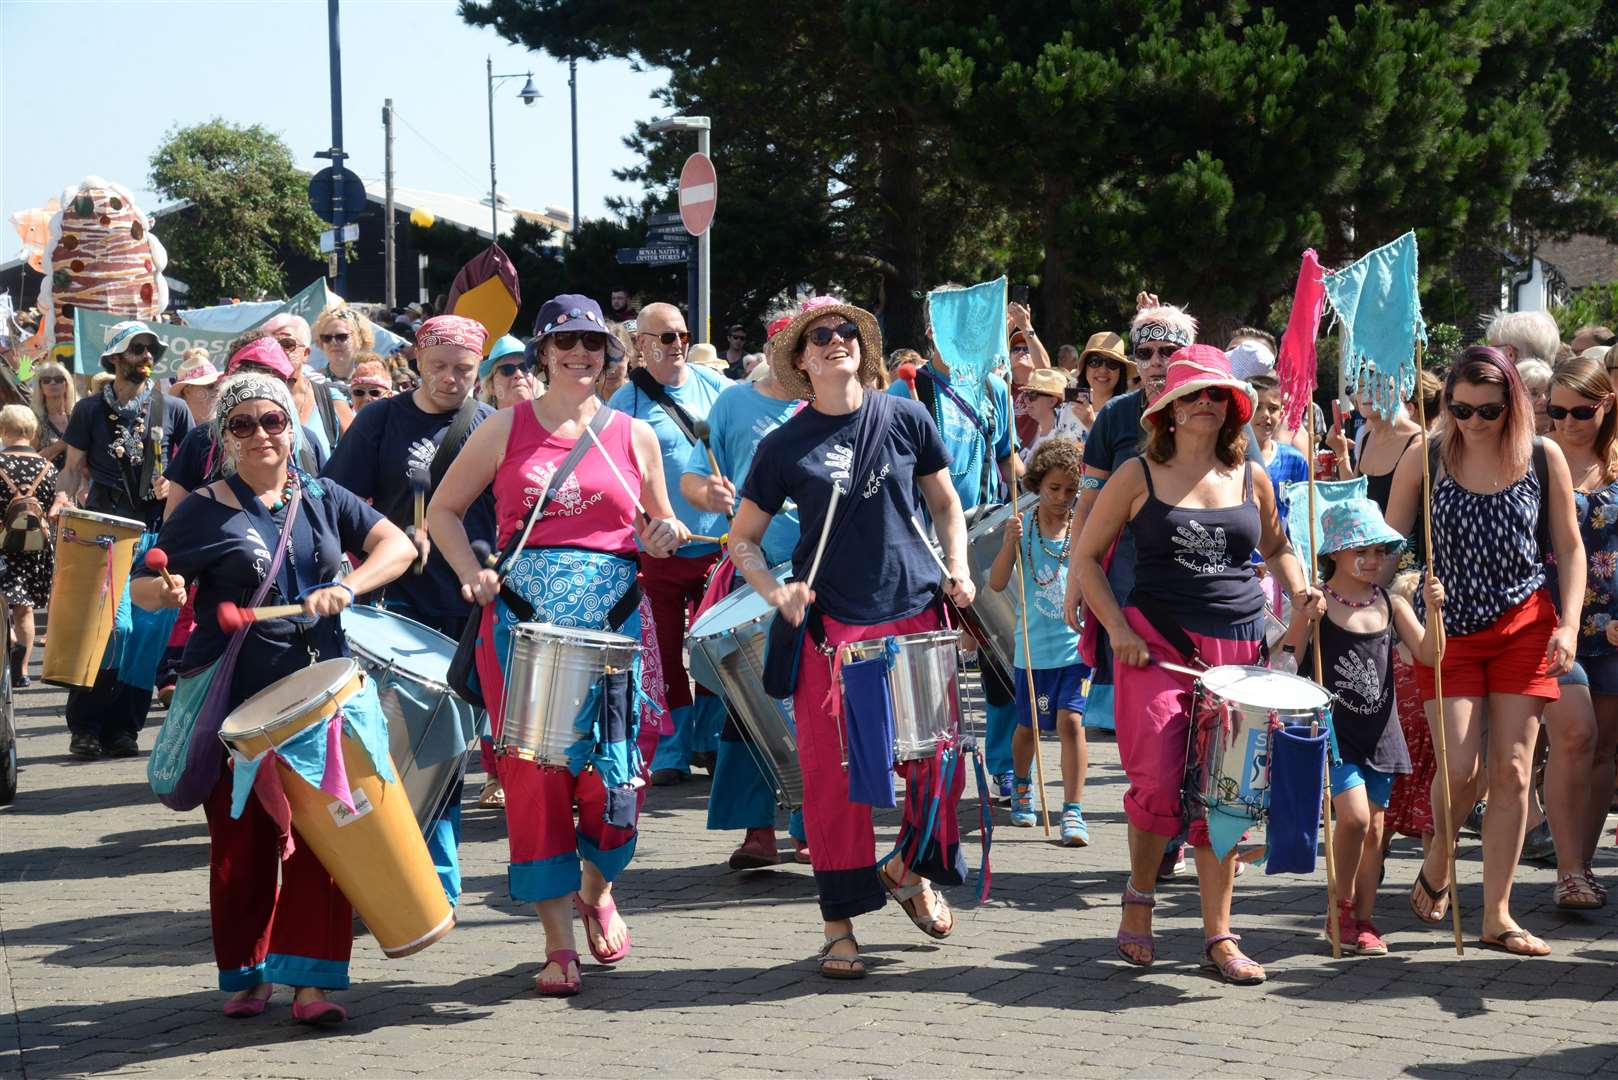 Samba Pelo Mar led the Whitstable Oyster Festival parade as it made its way through the town in 2018. Picture: Chris Davey